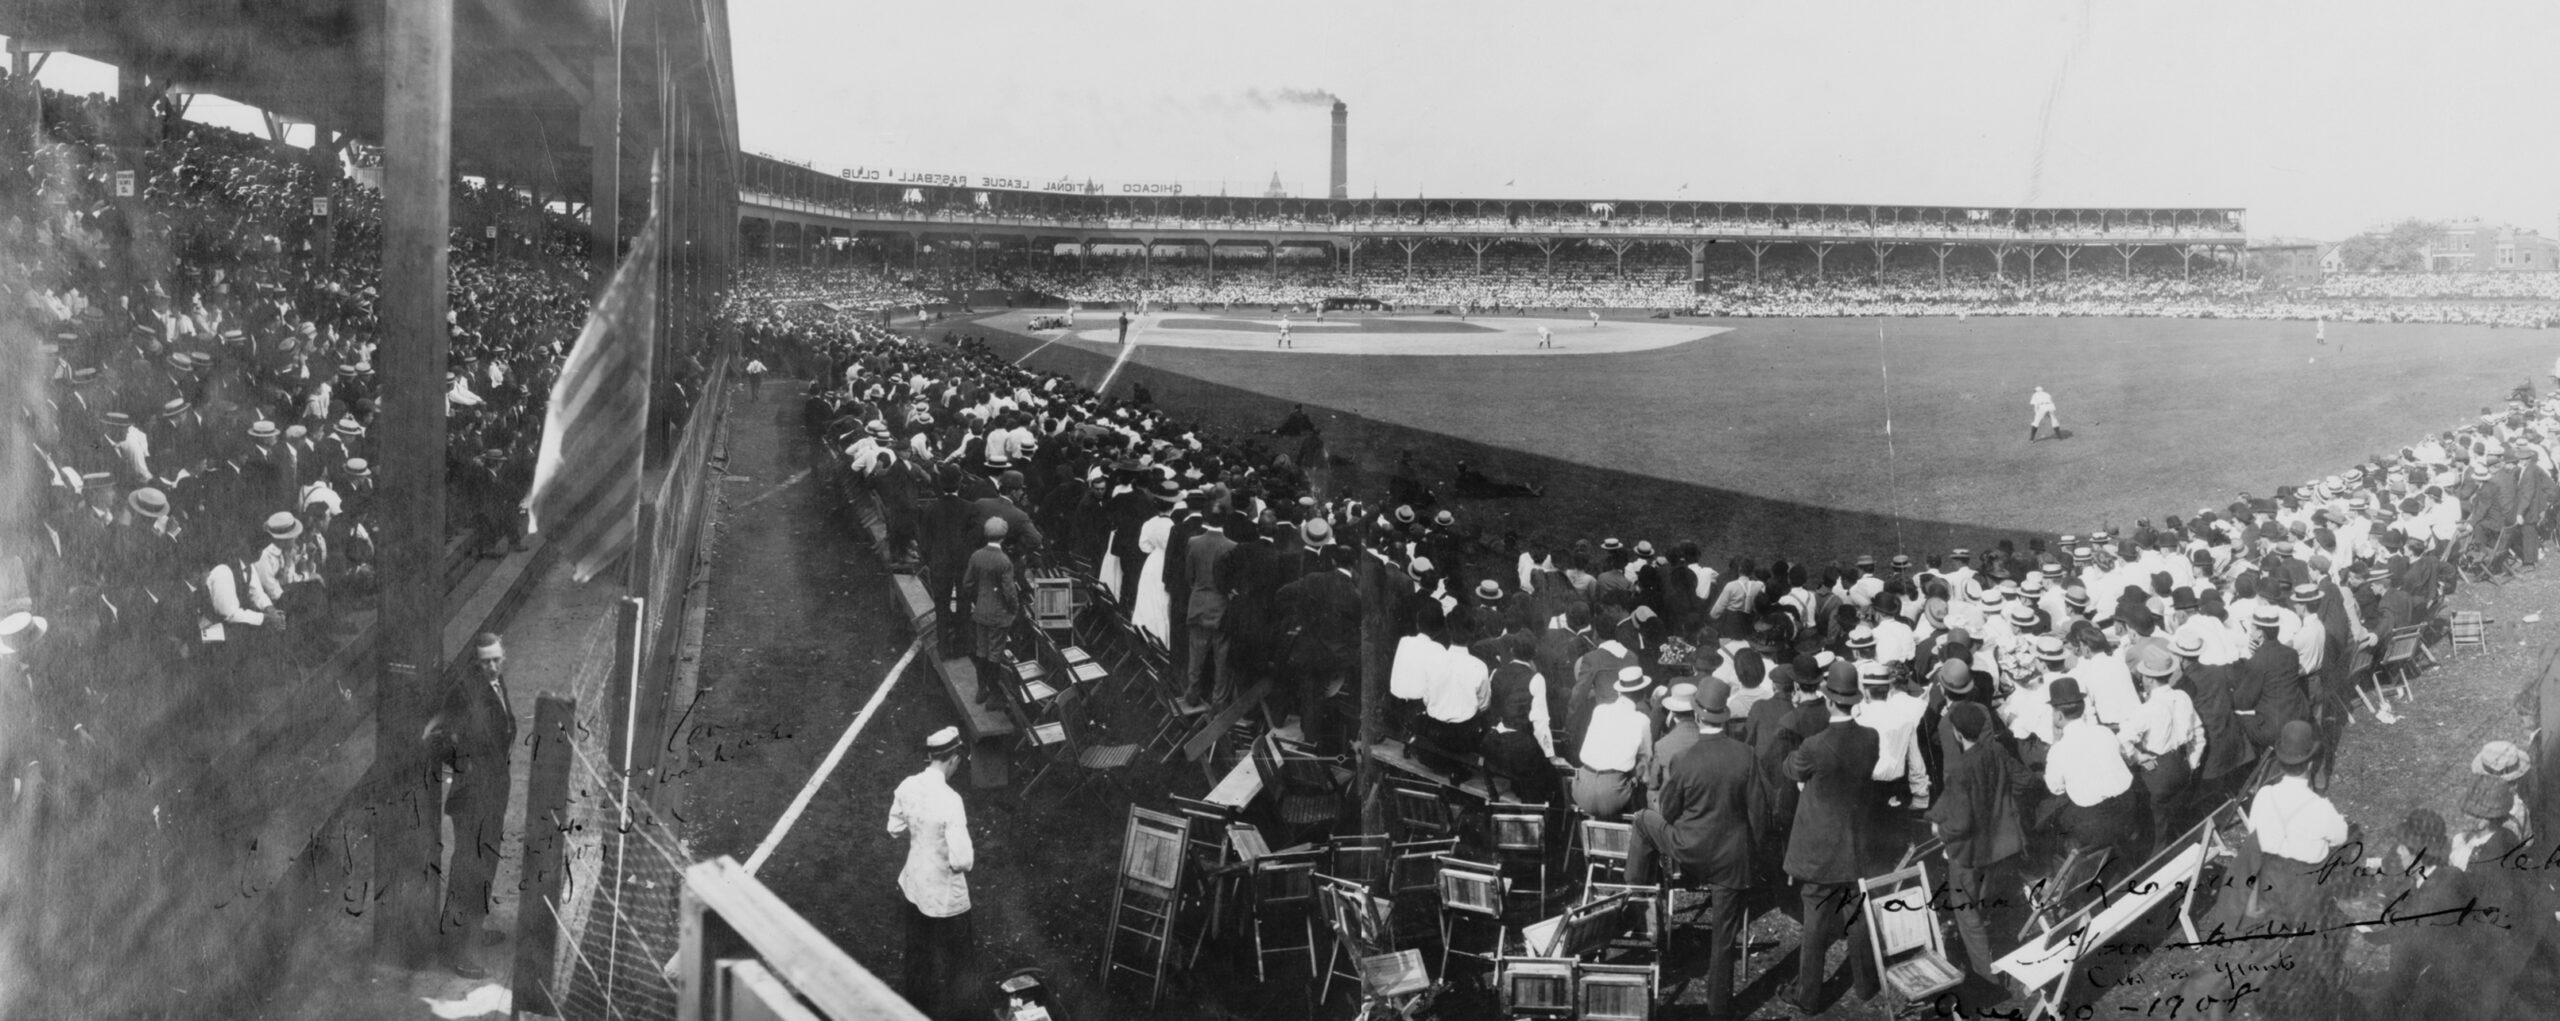 West Side Park, former home of the Chicago Cubs